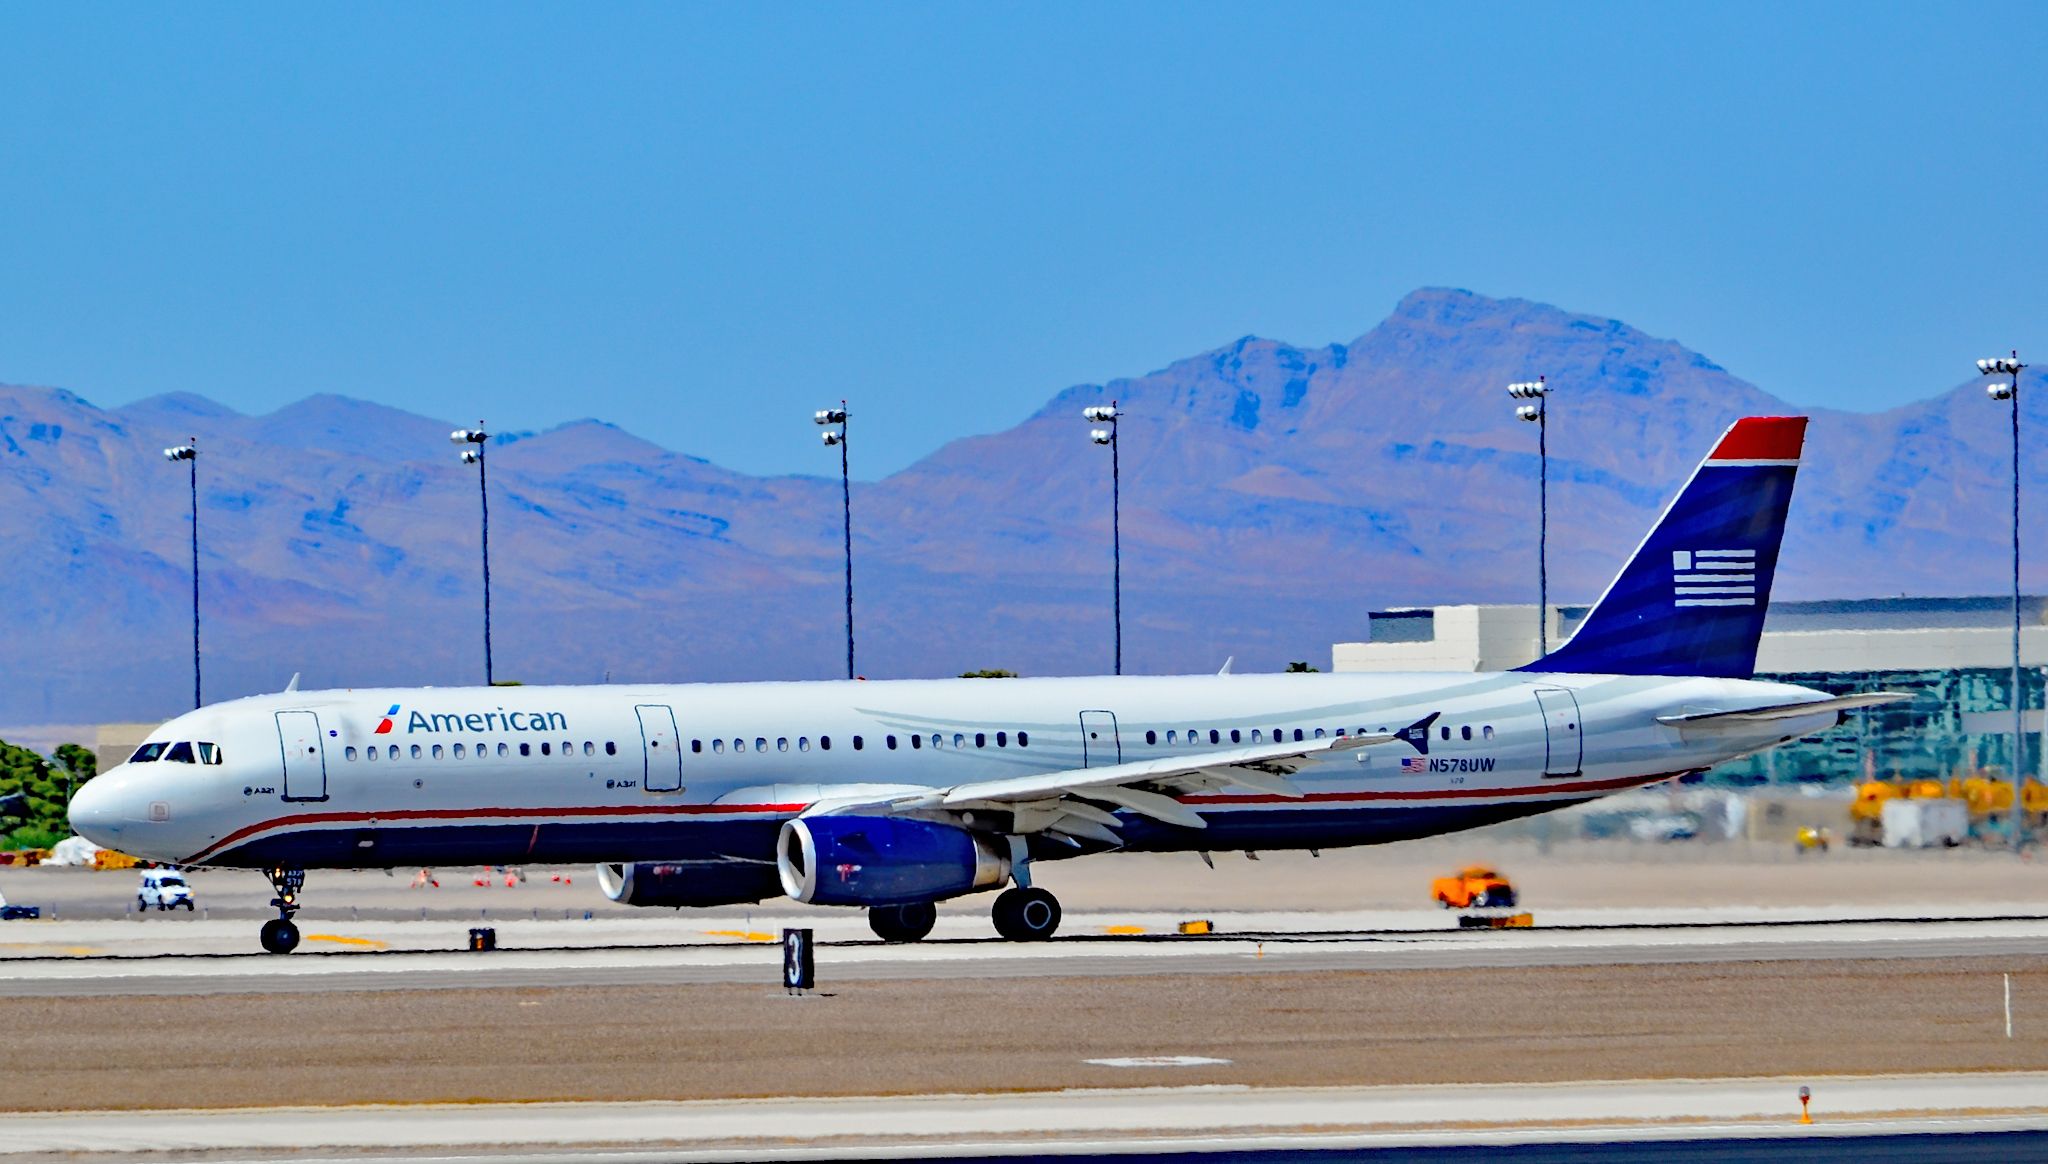 American Airlines US Airways Livery